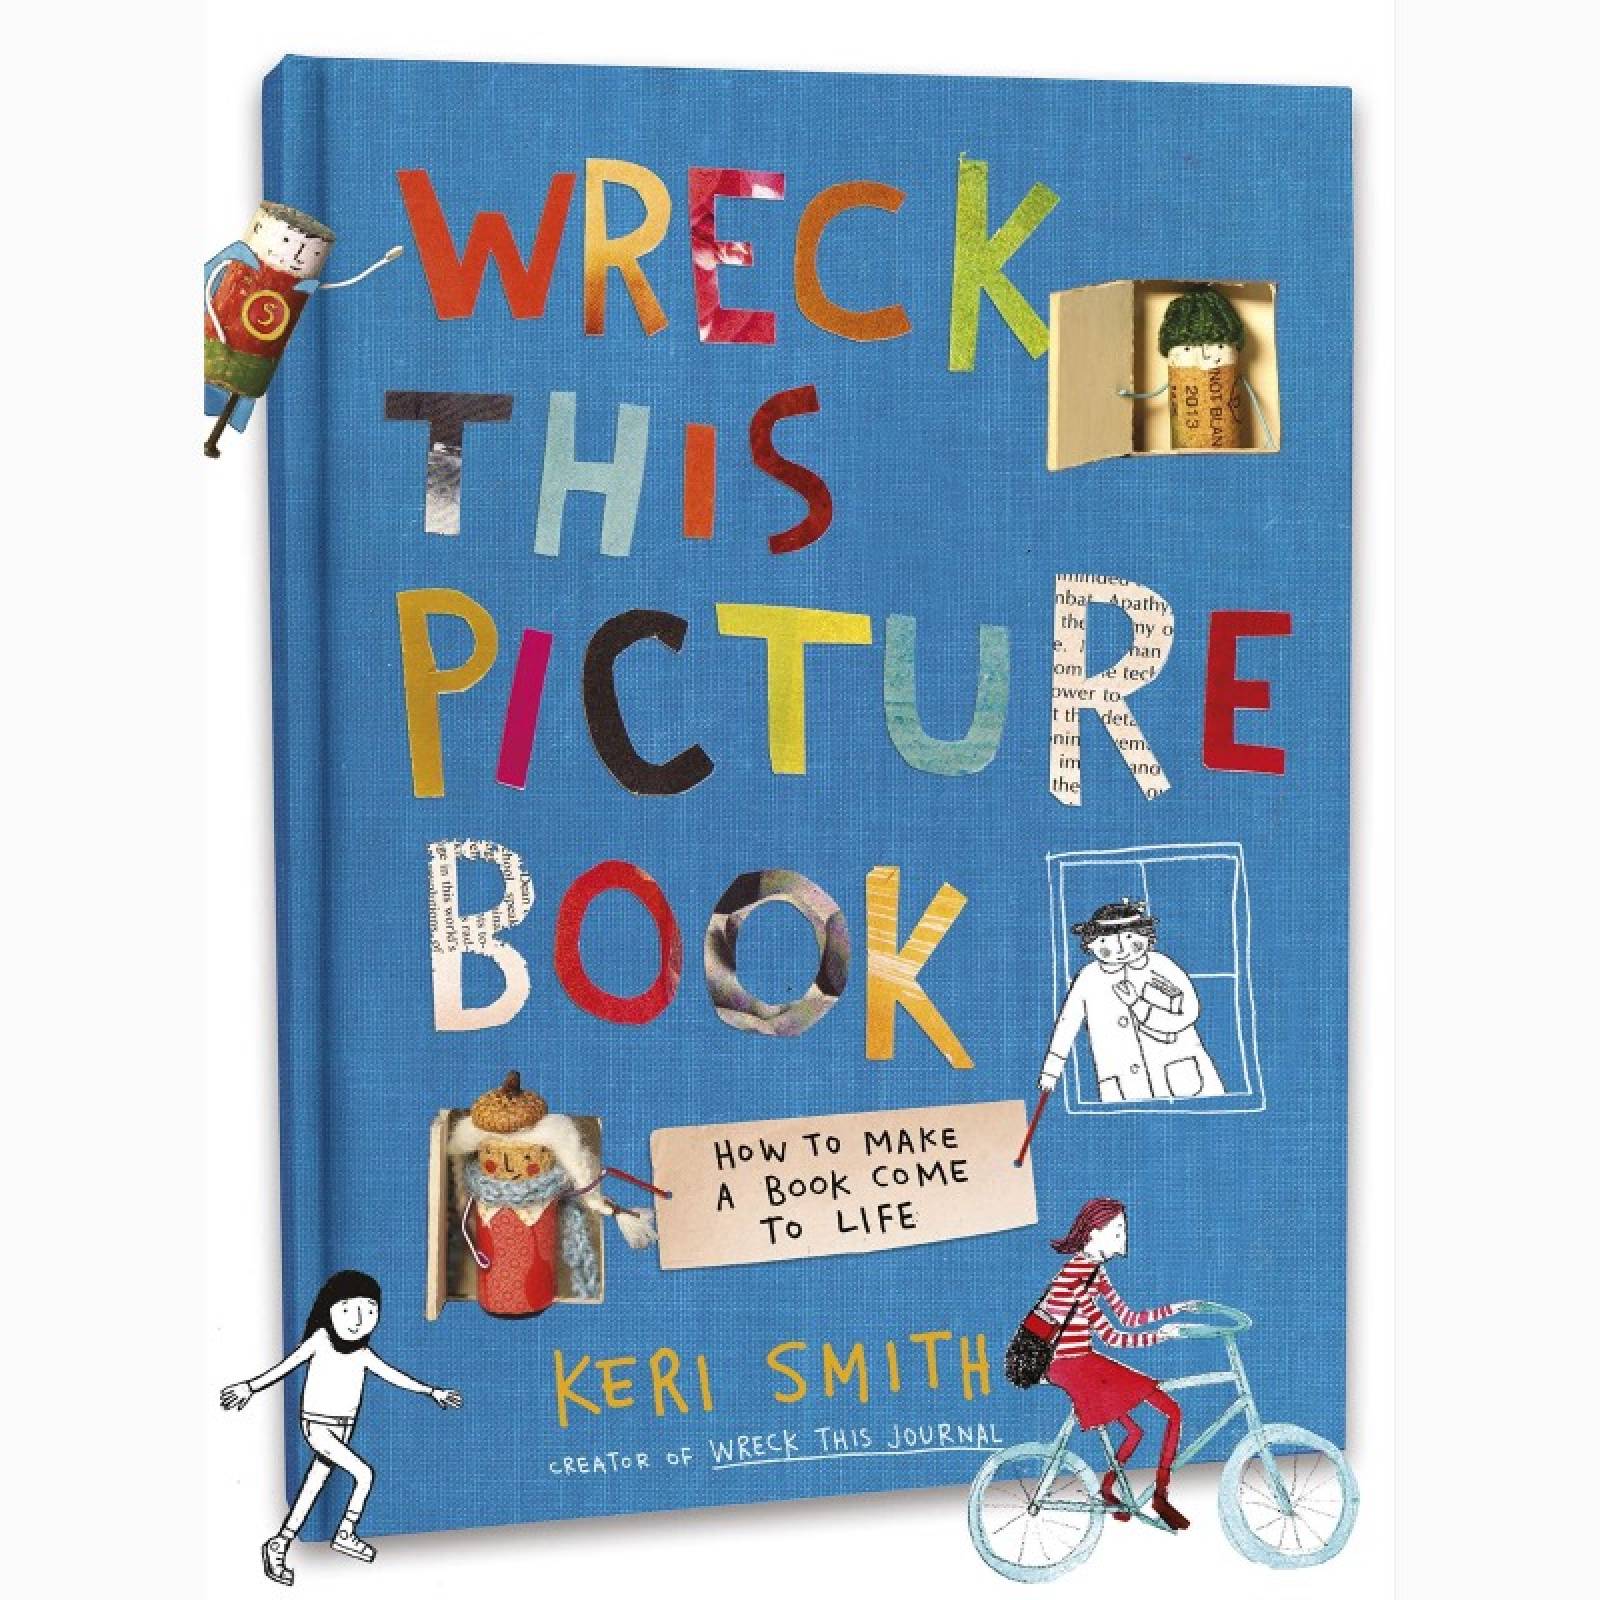 Wreck This Picture Book By Keri Smith - Hardback Book